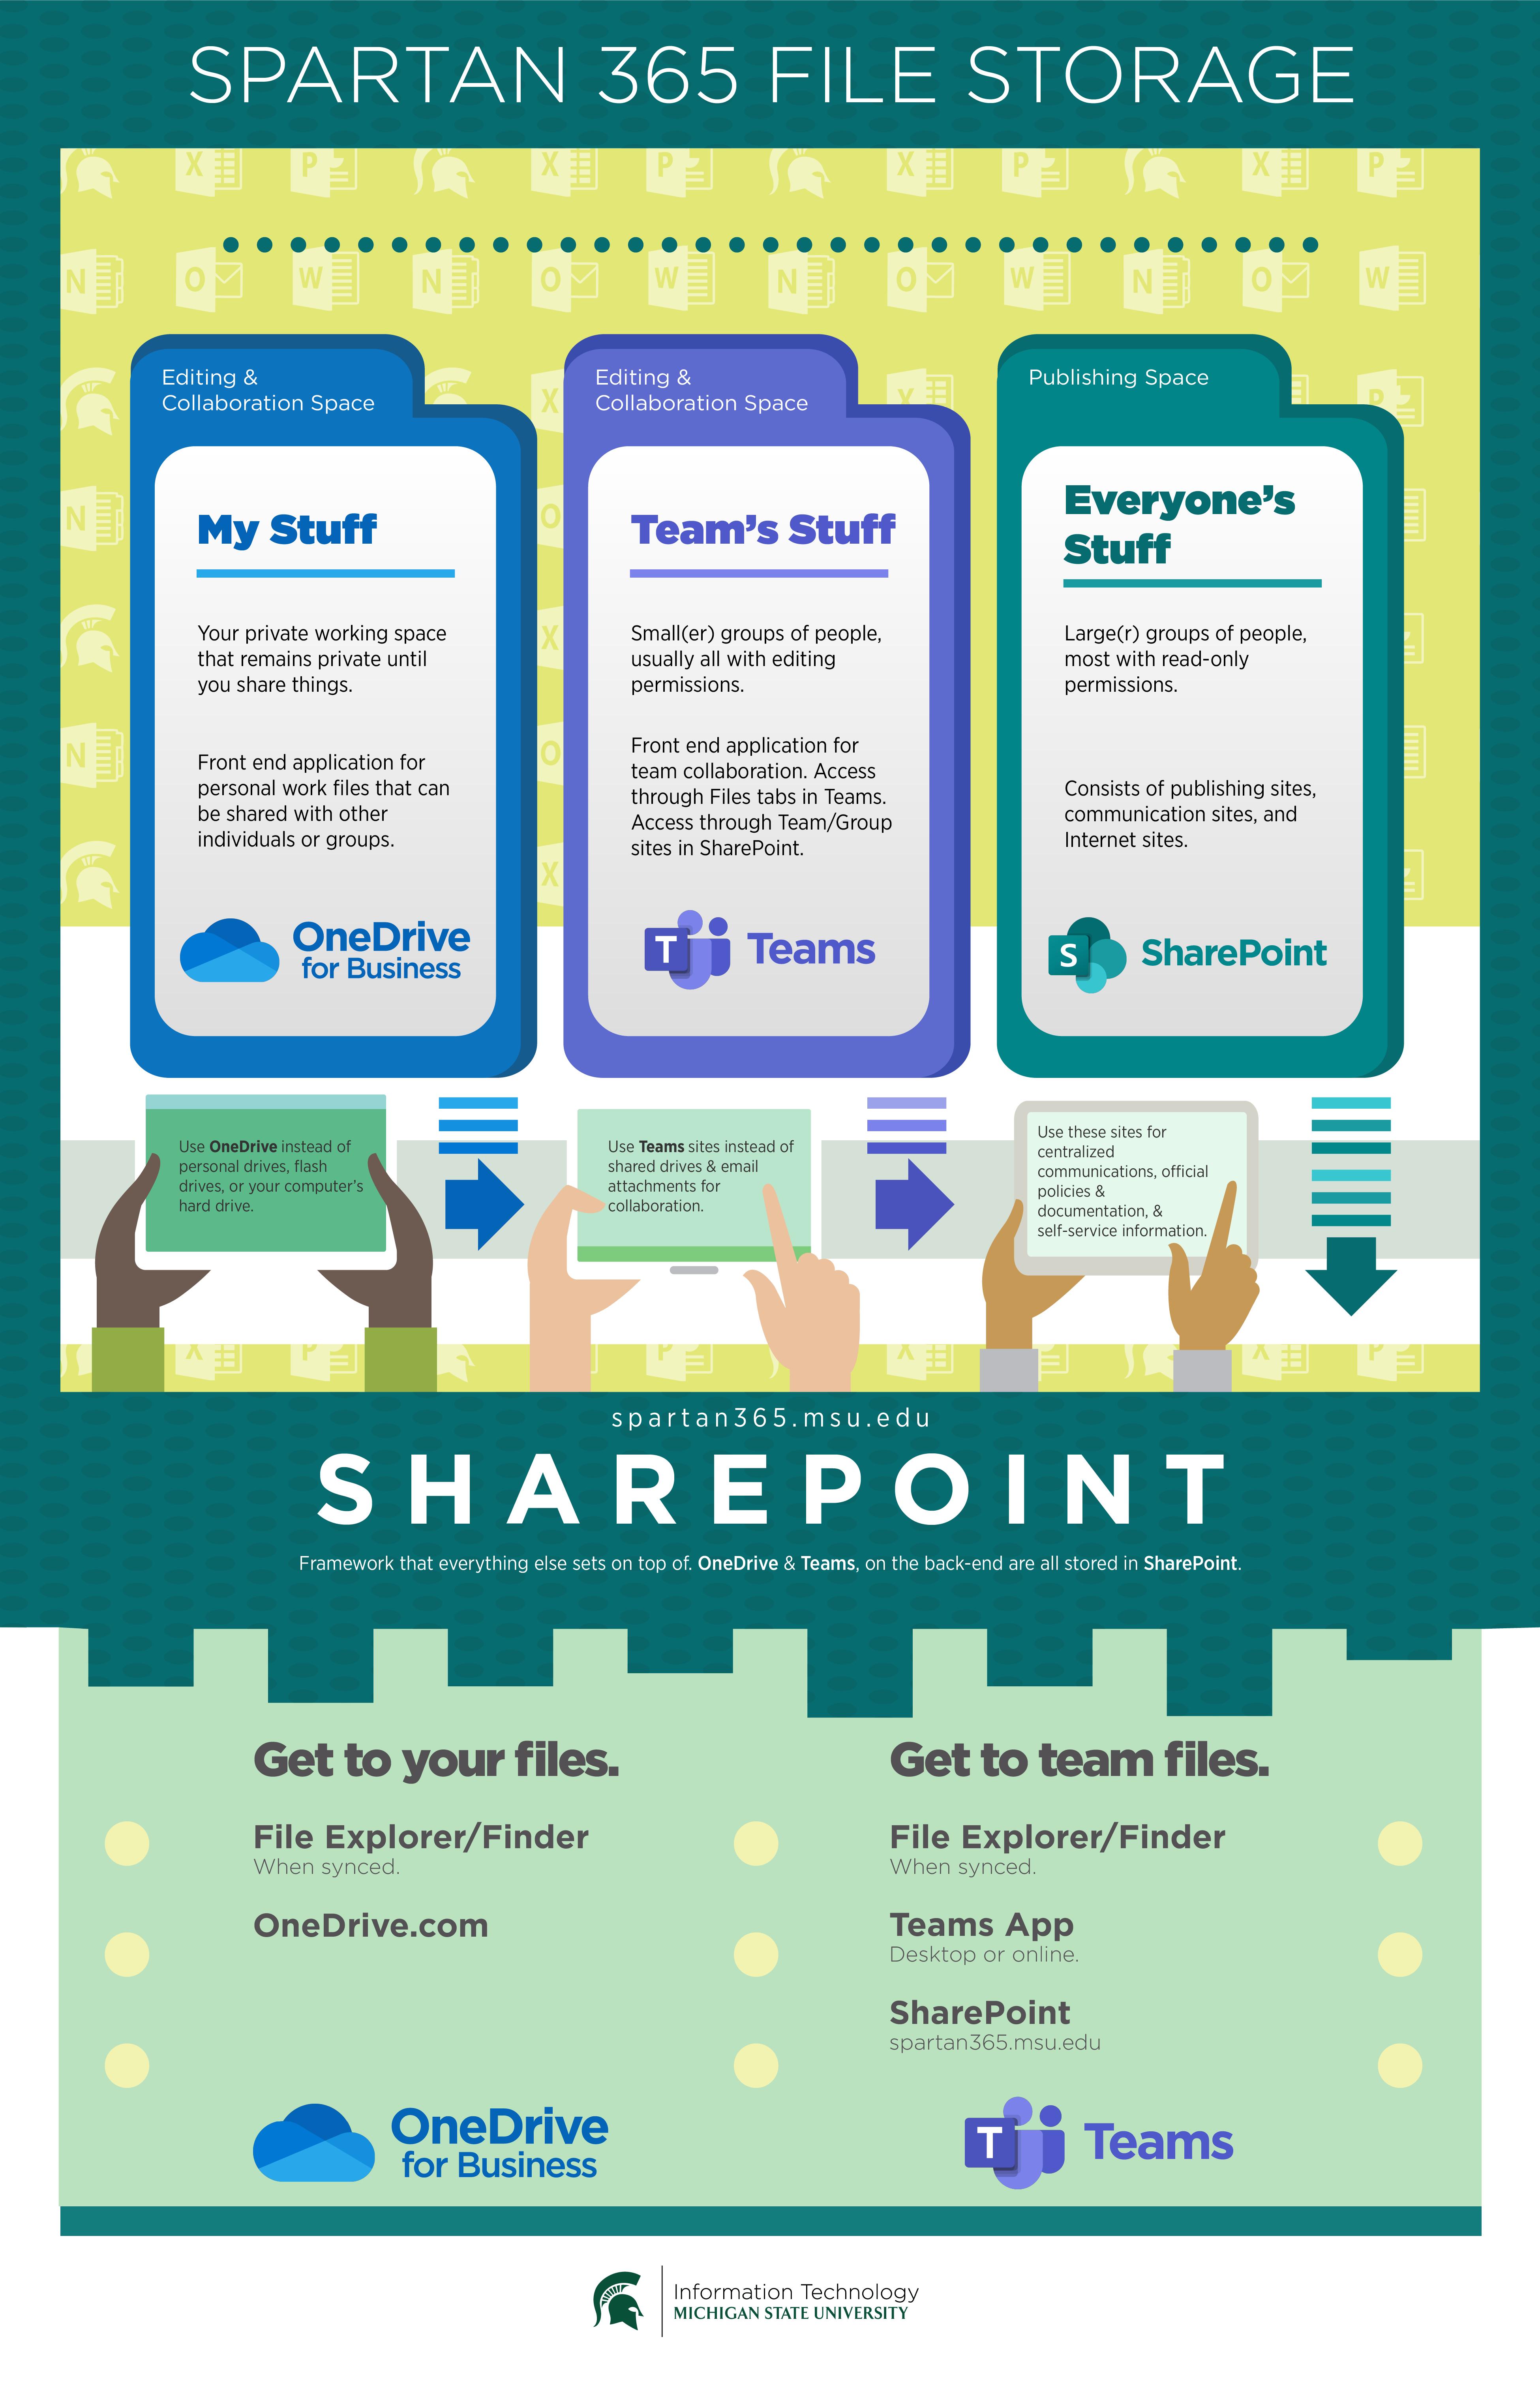 Graphic showing what files should be stored in OneDrive, Teams, and SharePoint.